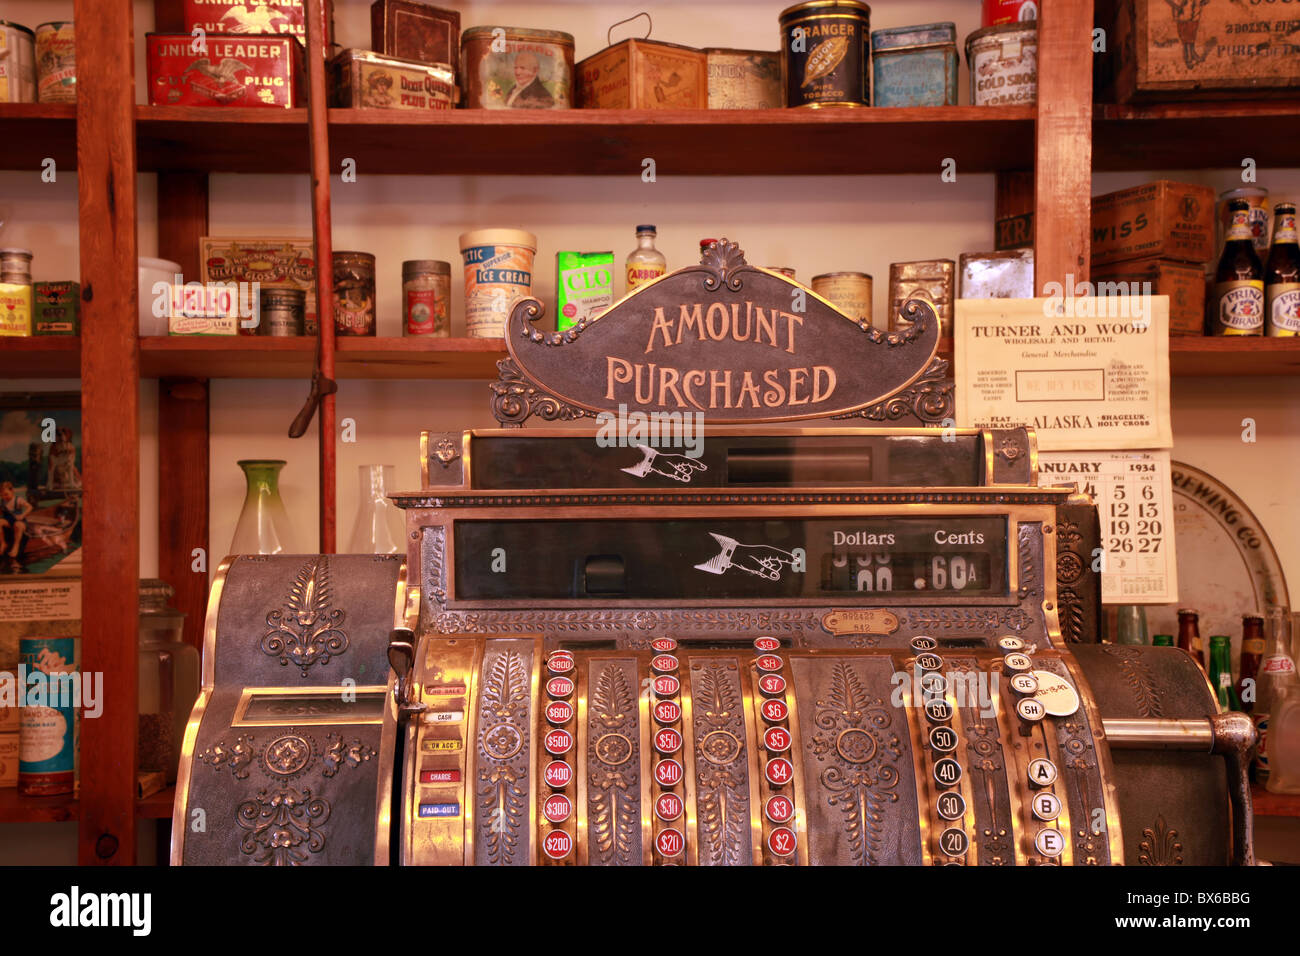 Old, antique cash register in a vintage apothecary shop in Yukon Territory, Canada. Stock Photo